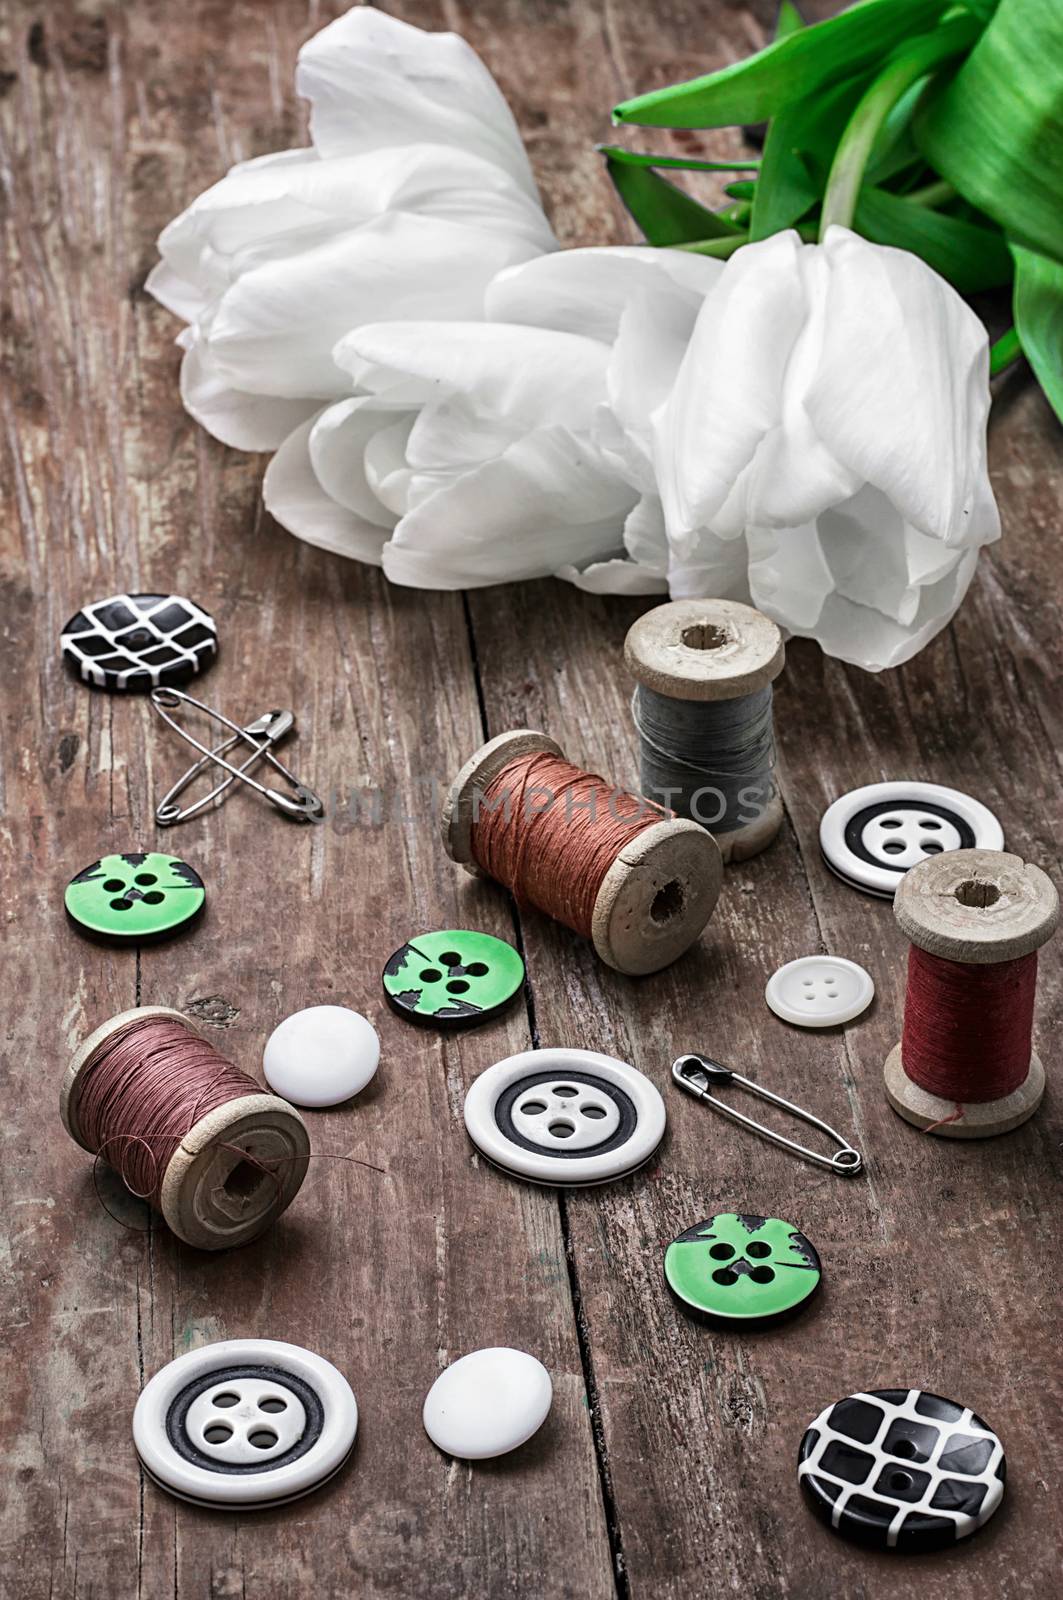 sewing accessories from threads and buttons  by LMykola